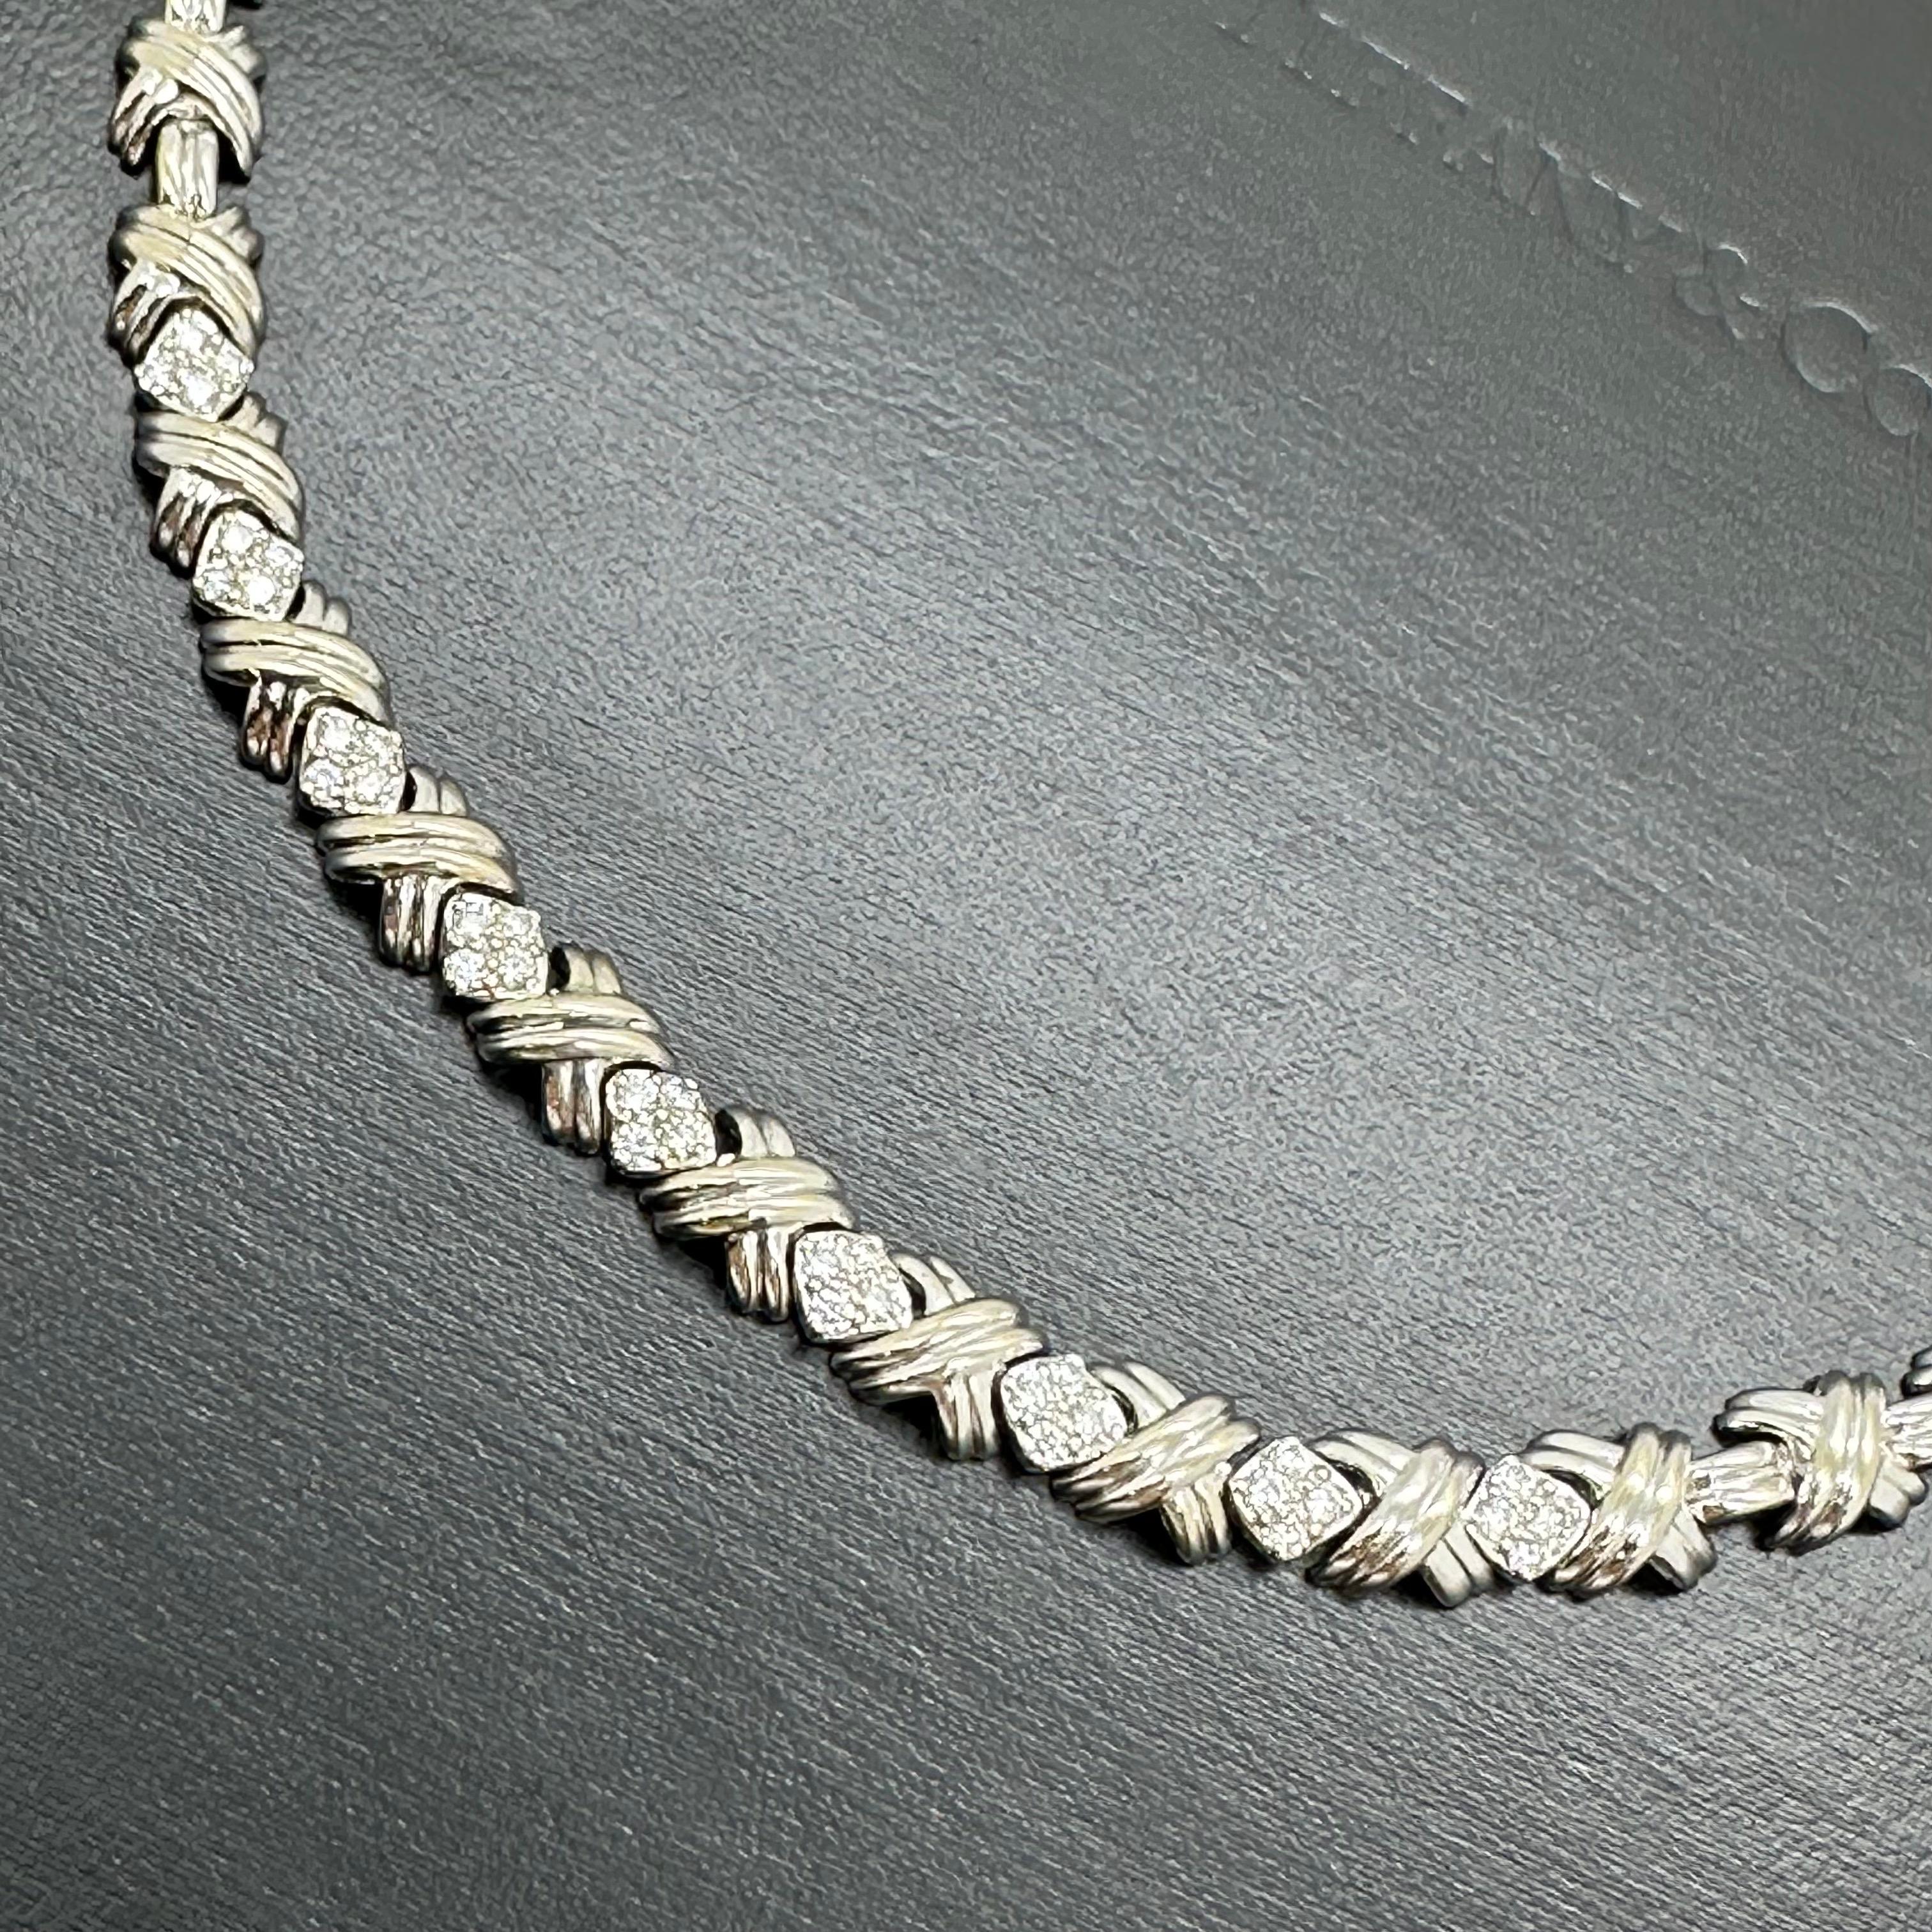 Tiffany & Co. Signature X Diamond Necklace in 18kt White Gold In Excellent Condition For Sale In San Diego, CA